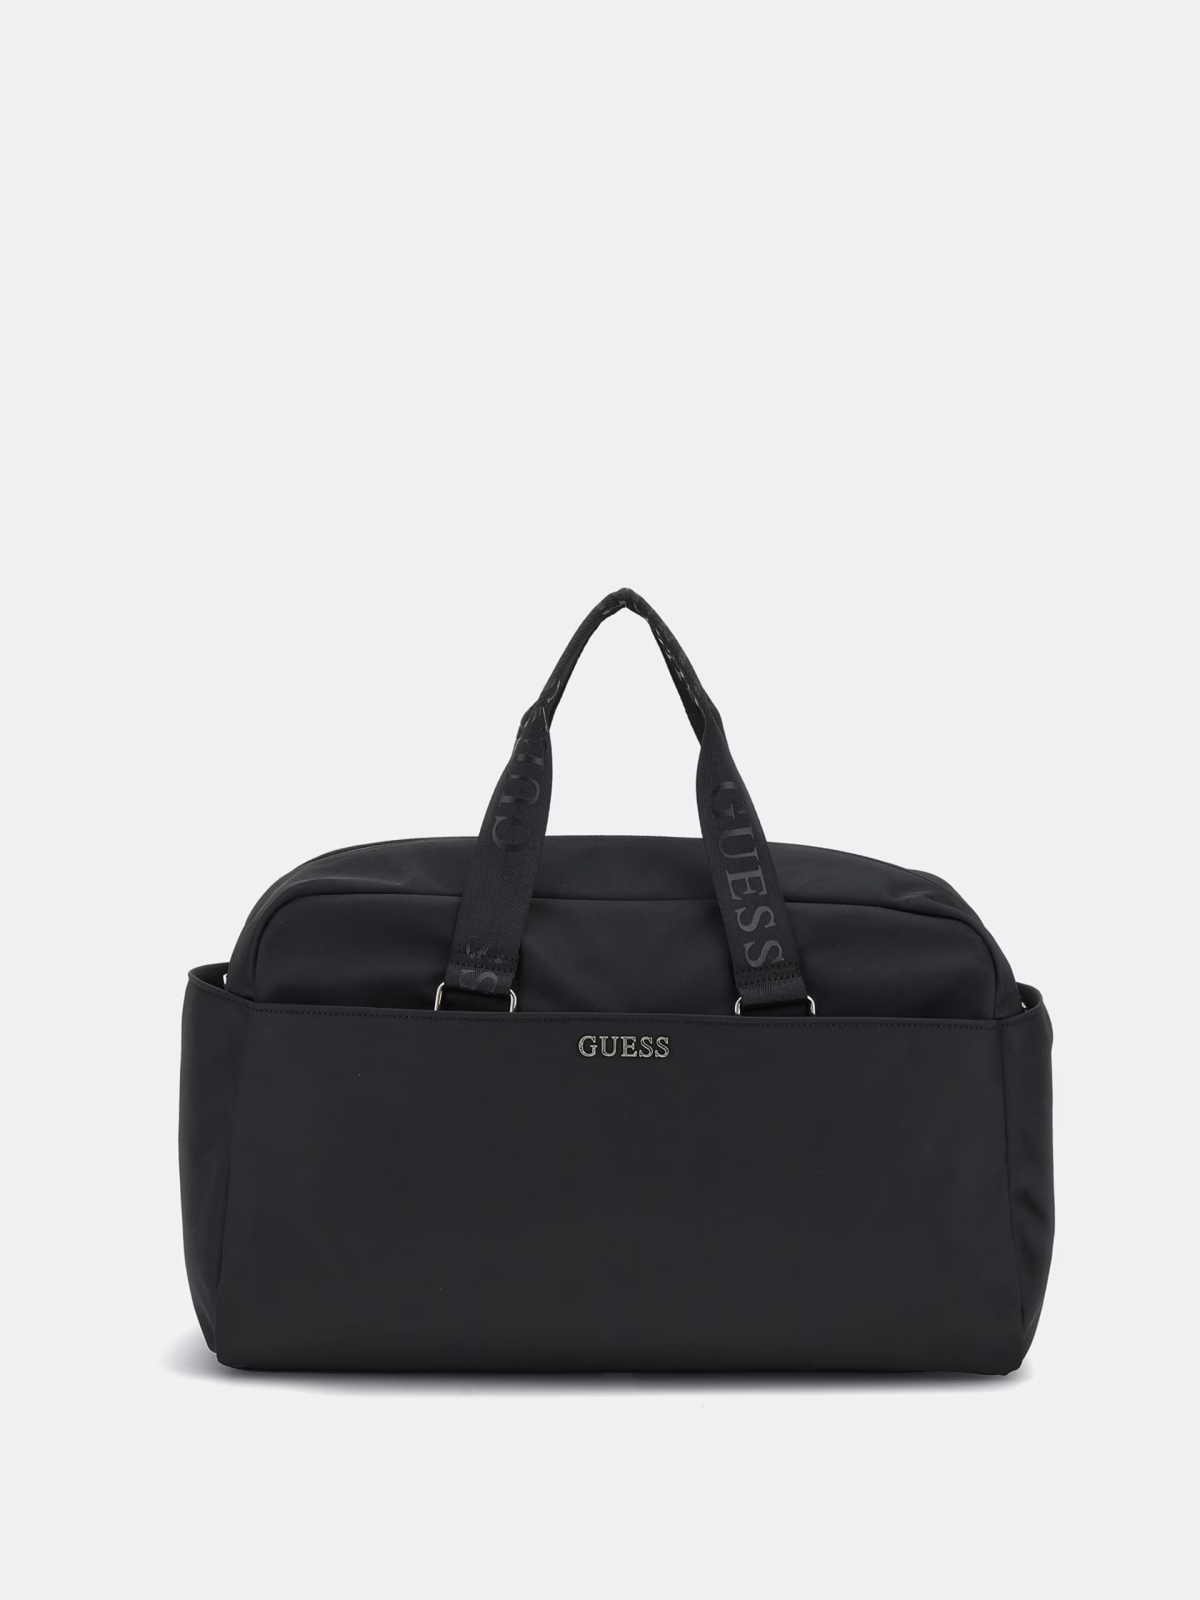 Guess gym bag one